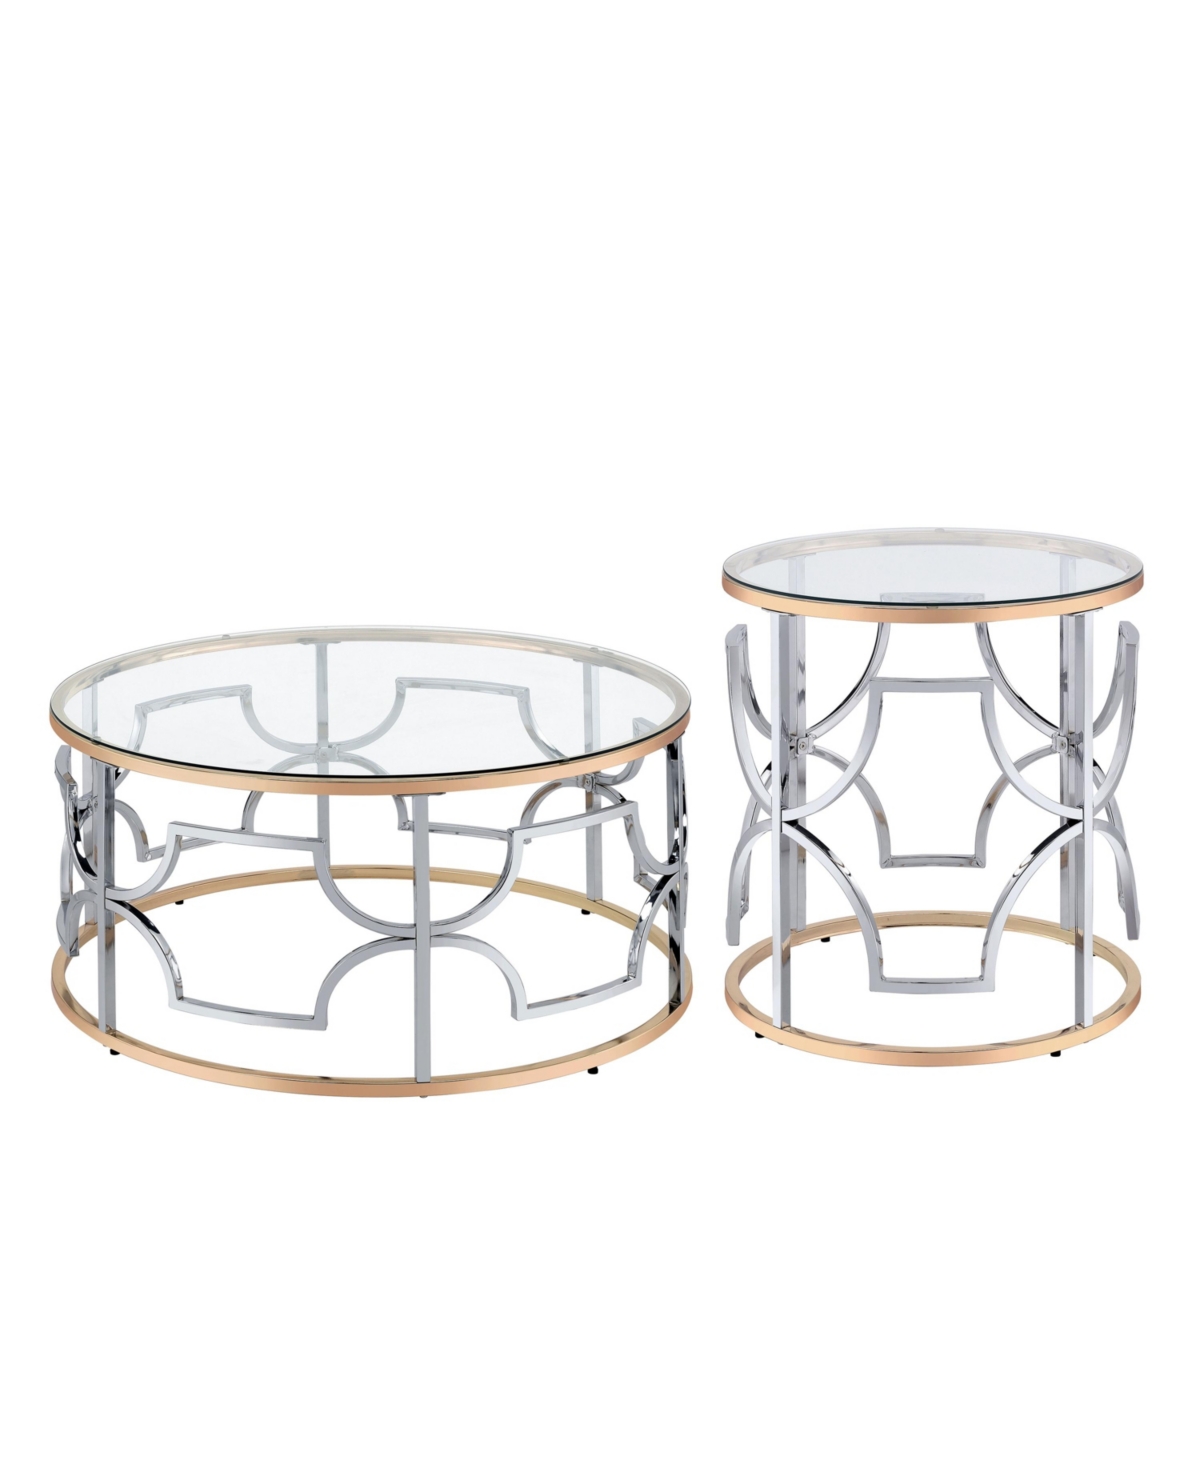 Furniture Of America 2-piece Metal, Glass Camille Modern Tempered Glass Top Table Set In Chrome And Gold